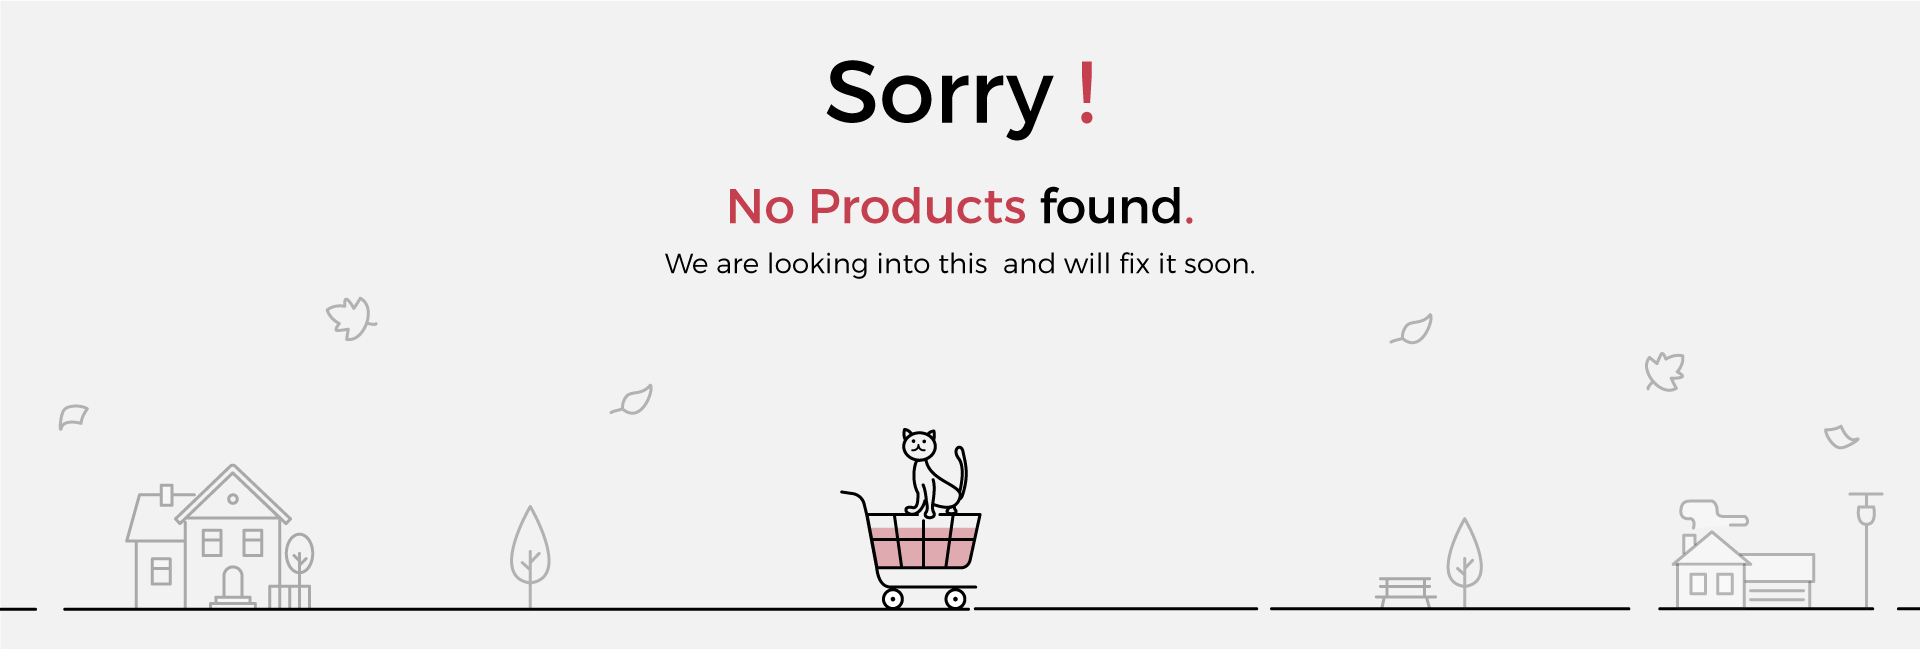 Product not found. No product. Sorry Production.